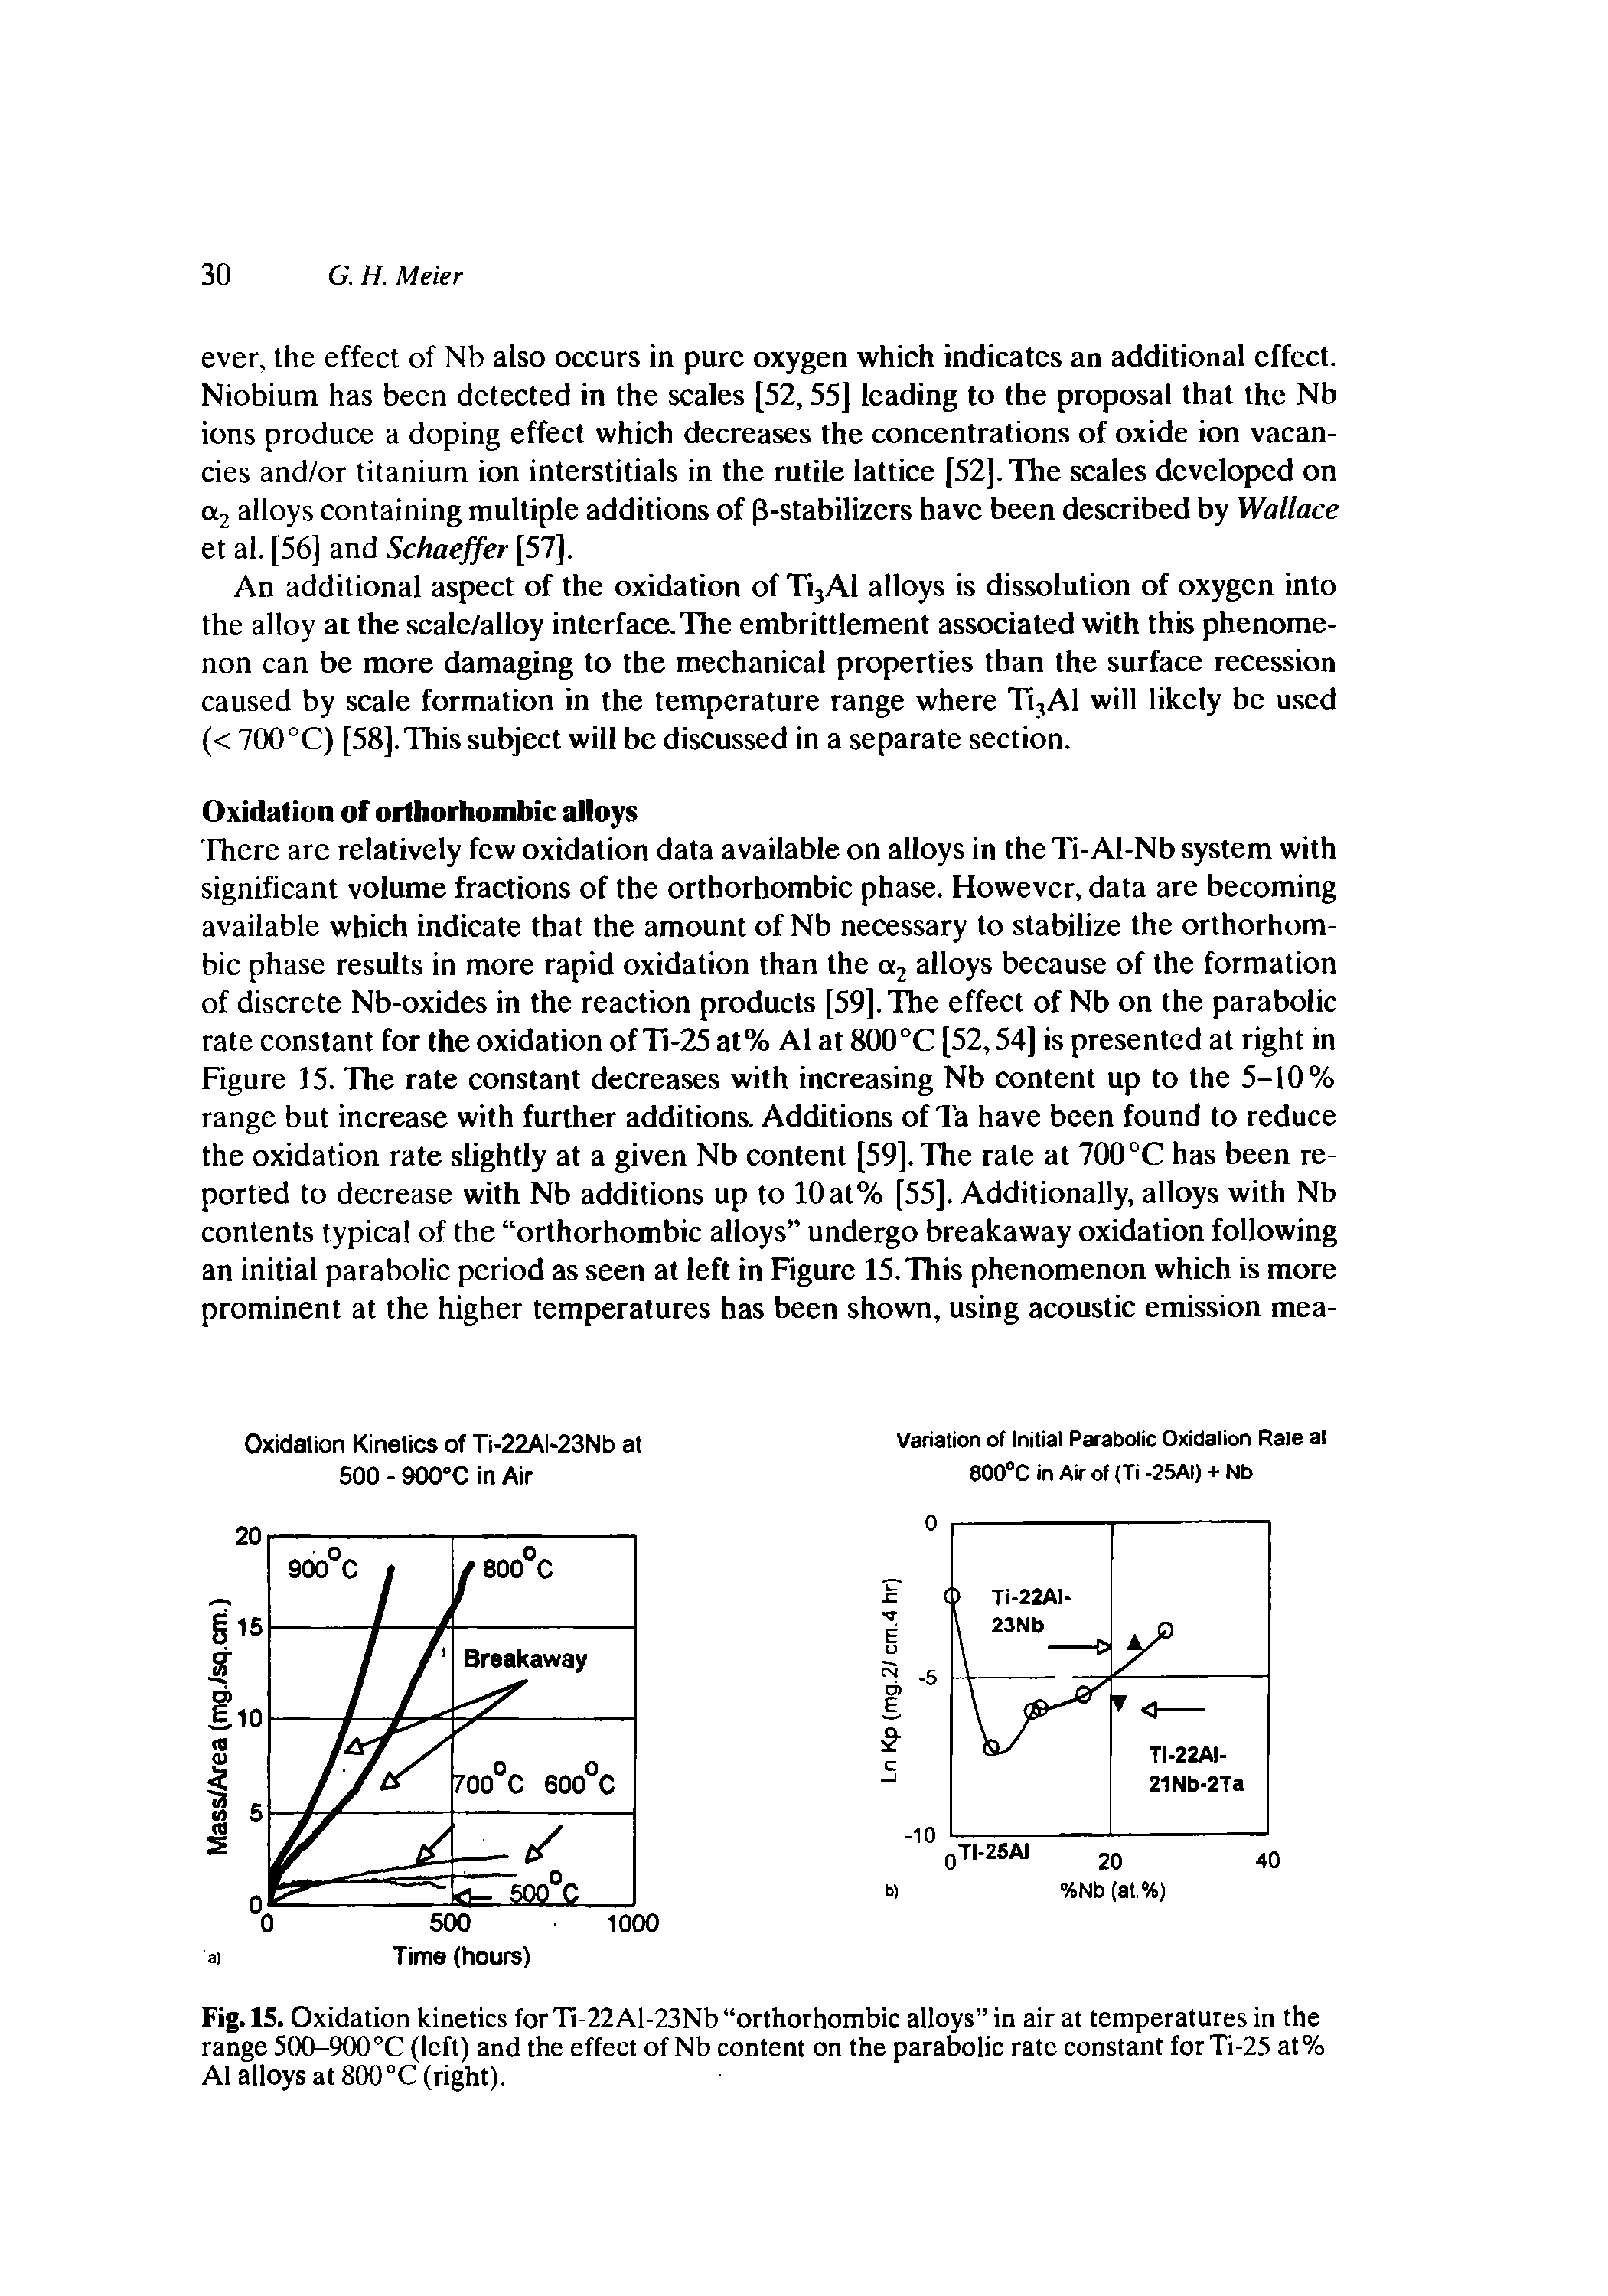 Fig. 15. Oxidation kinetics for Ti-22 Al-23Nb orthorhombic alloys in air at temperatures in the range 500-900 °C (left) and the effect of Nb content on the parabolic rate constant for Ti-25 at% Al alloys at 800°C (right).